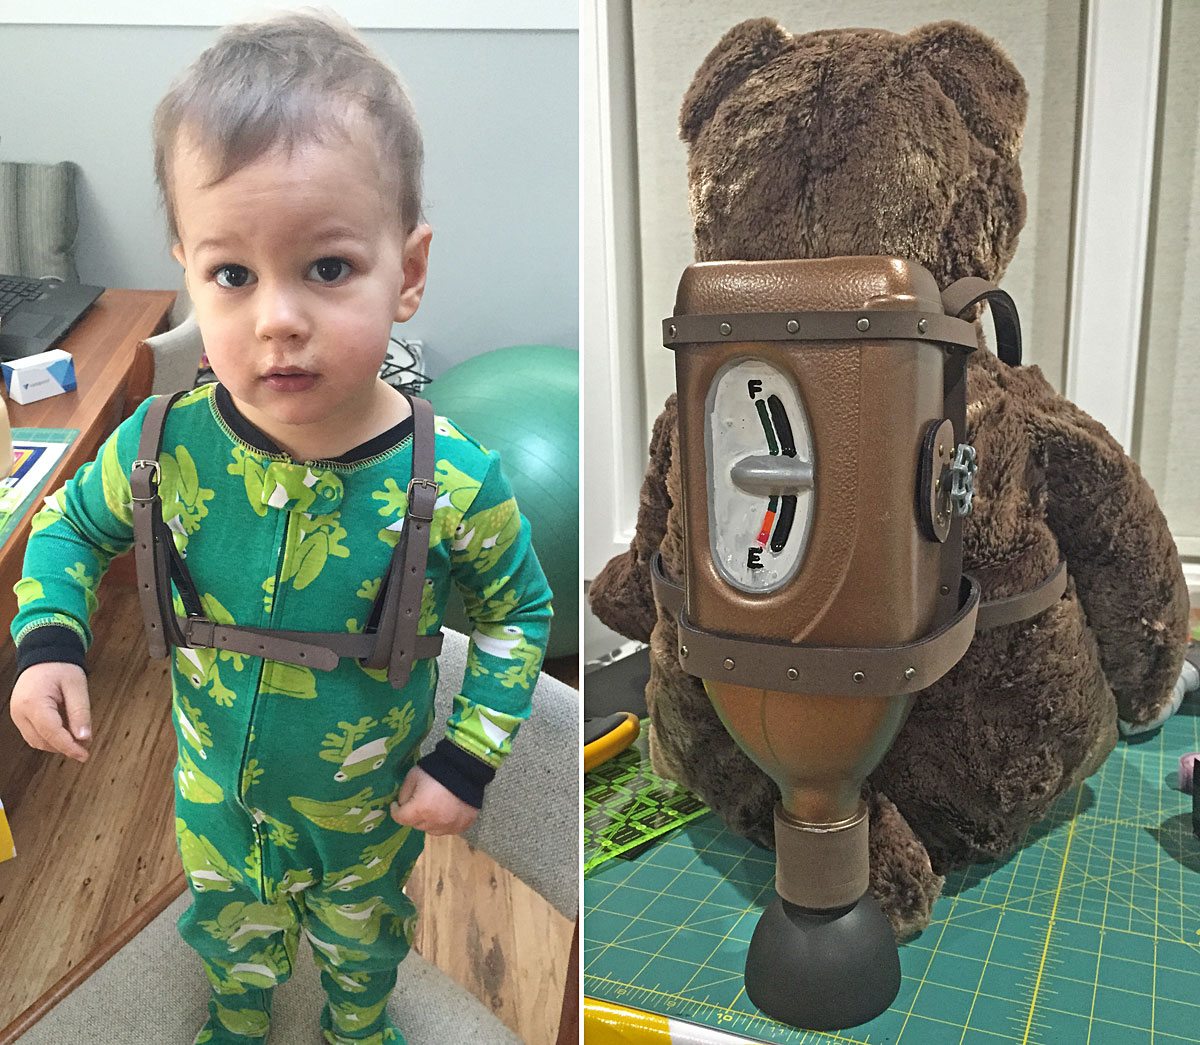 Captain Owen trying on his finished jetpack and Castle Bear modelling it. Photo by Will James.